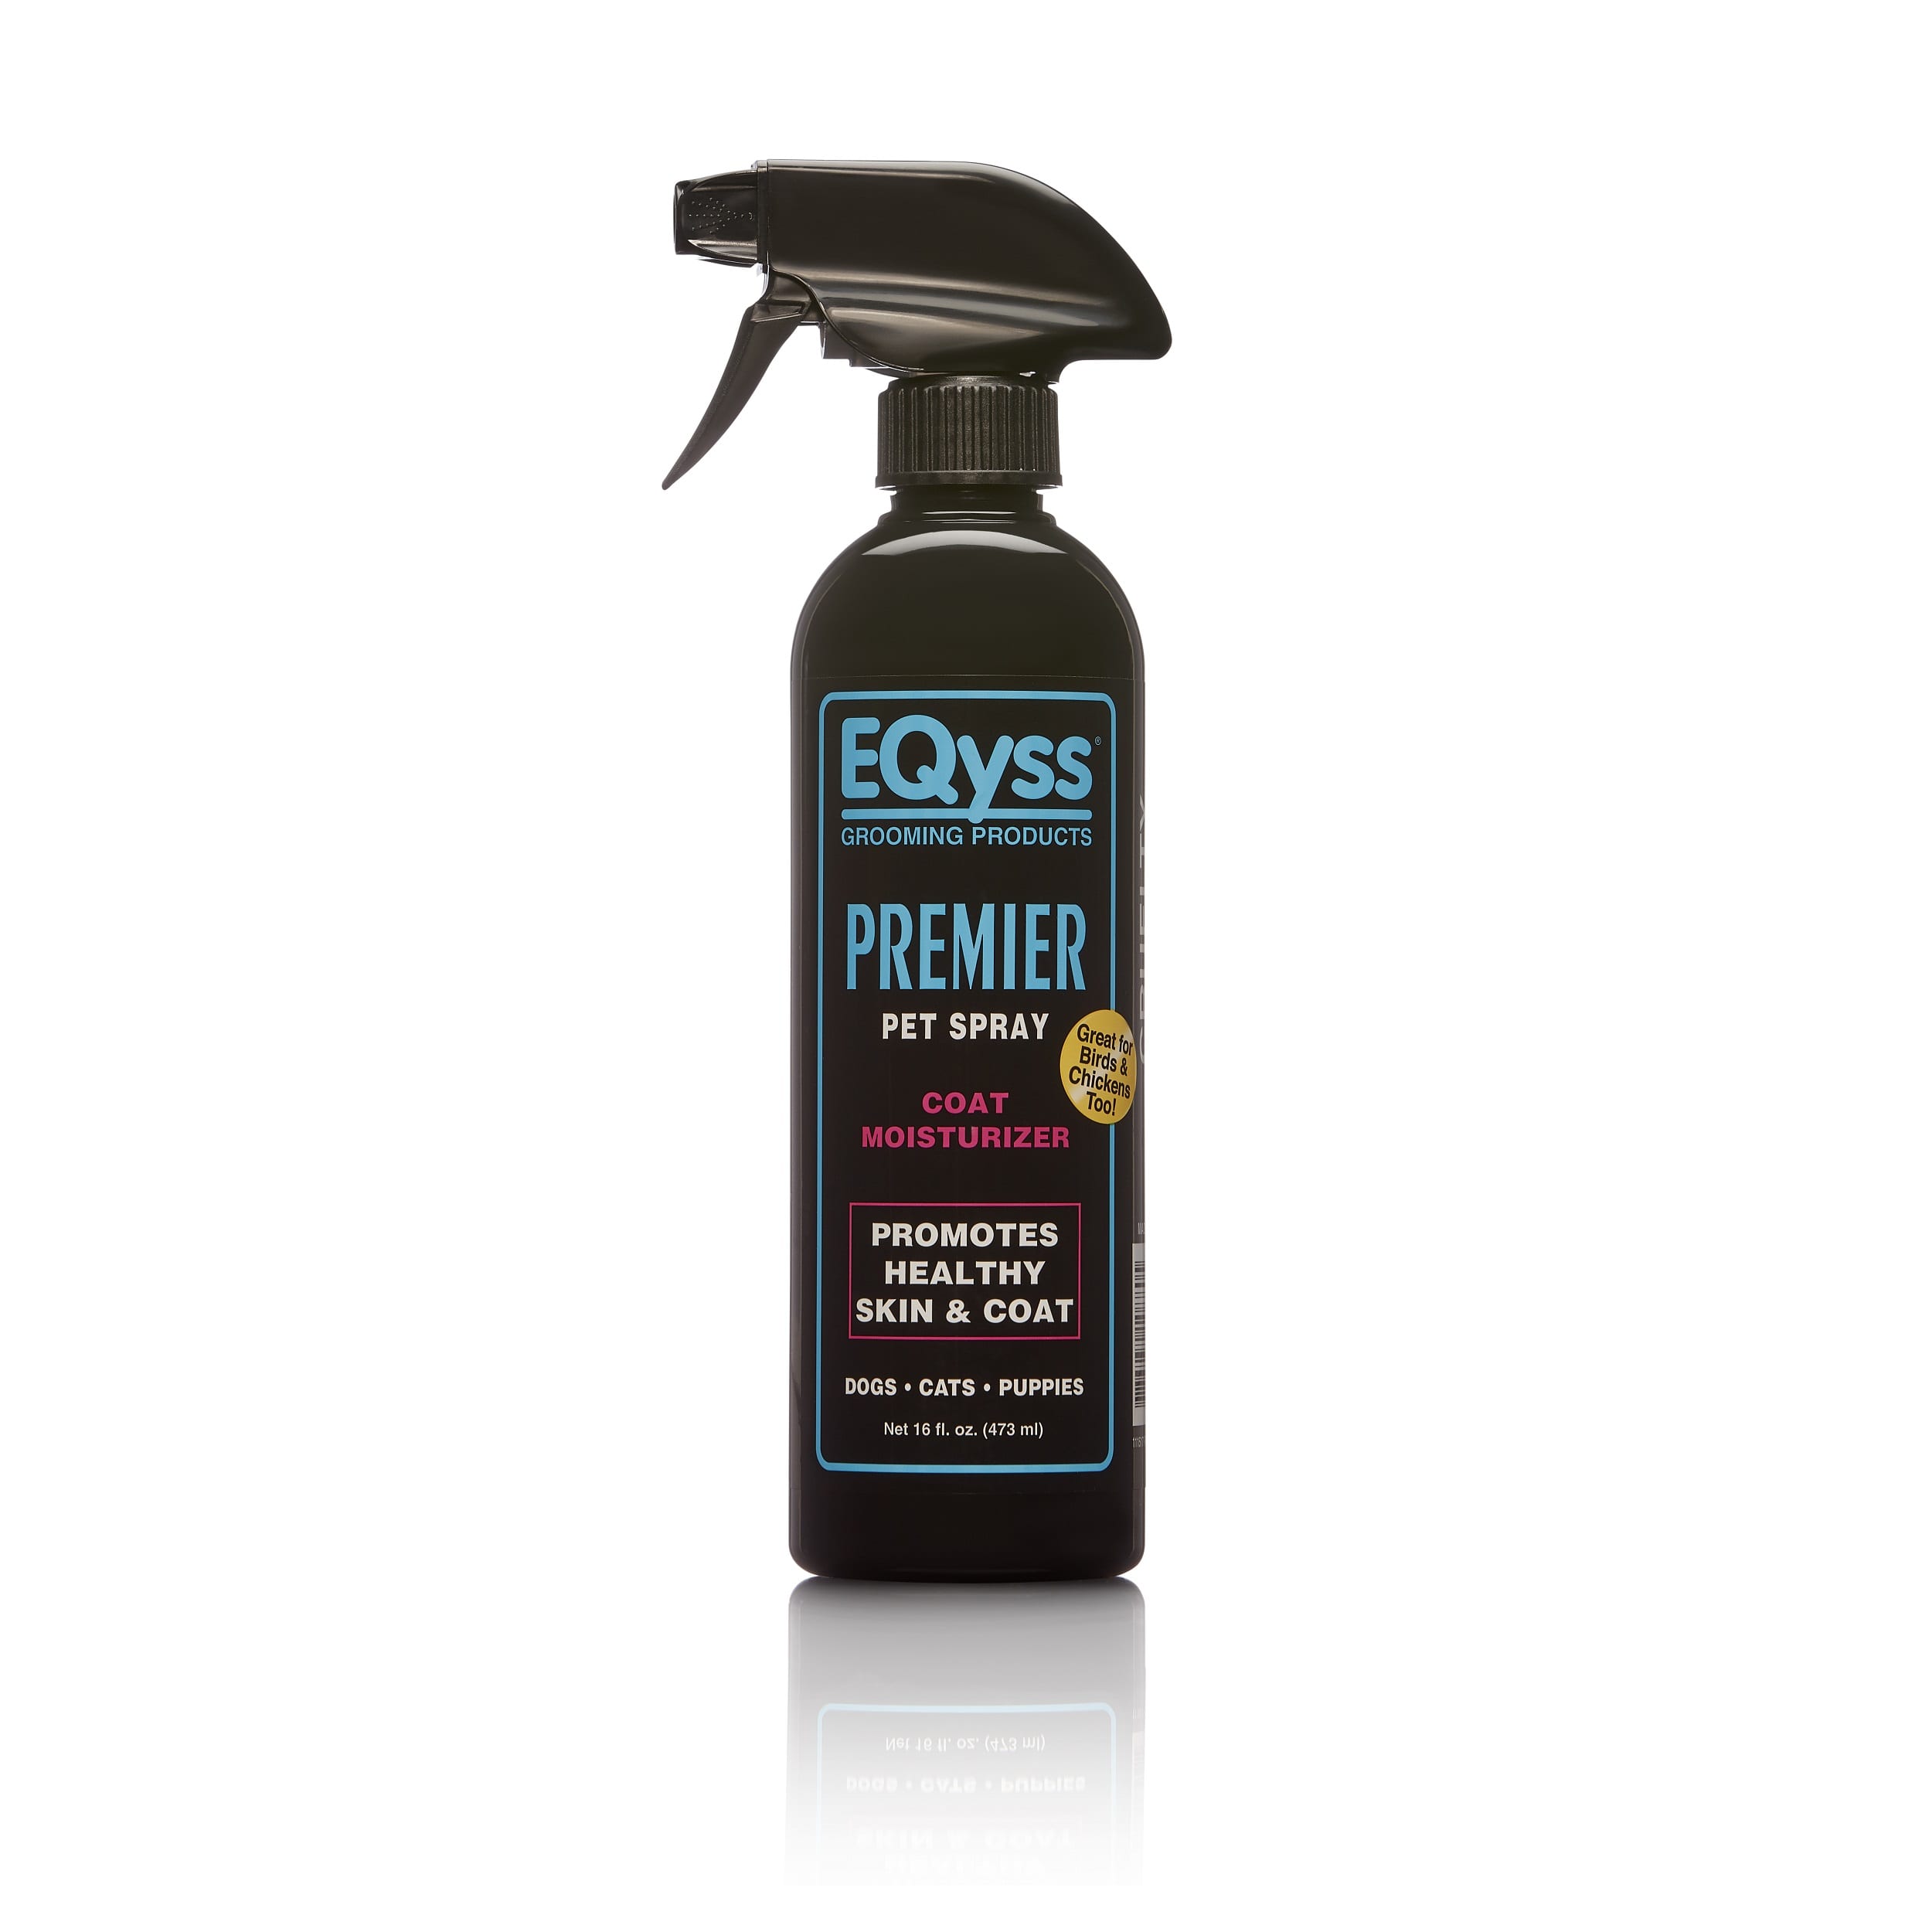 Premier Pet Spray ⋆ EQyss Grooming Products Inc.